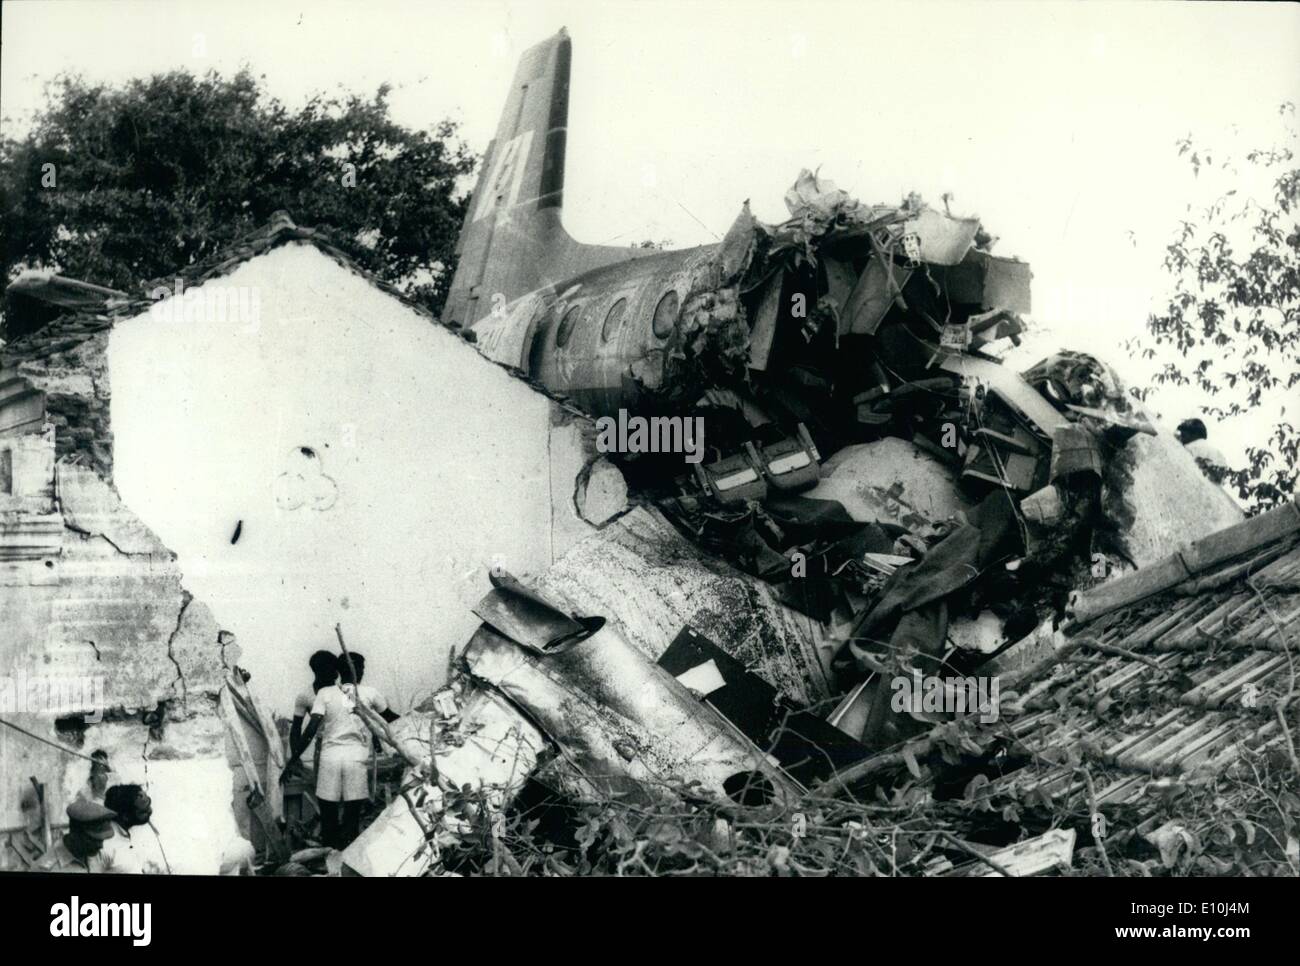 Mar. 03, 1973 - Indian Airlines Avro trainer-plane which crashed into a house in Secundrabad (Andhra Pradesh) on March 15, 1973, killing all the three occupants. It also led to the resignation of the Union Minister for Civil Aviation and Tourism Dr. Karan Singh which has since been rejected by Prime Minister Mrs. Indira Gandhi. Our photo shows the engine and cockpit buried in the house while the body lands on top of a building. Stock Photo